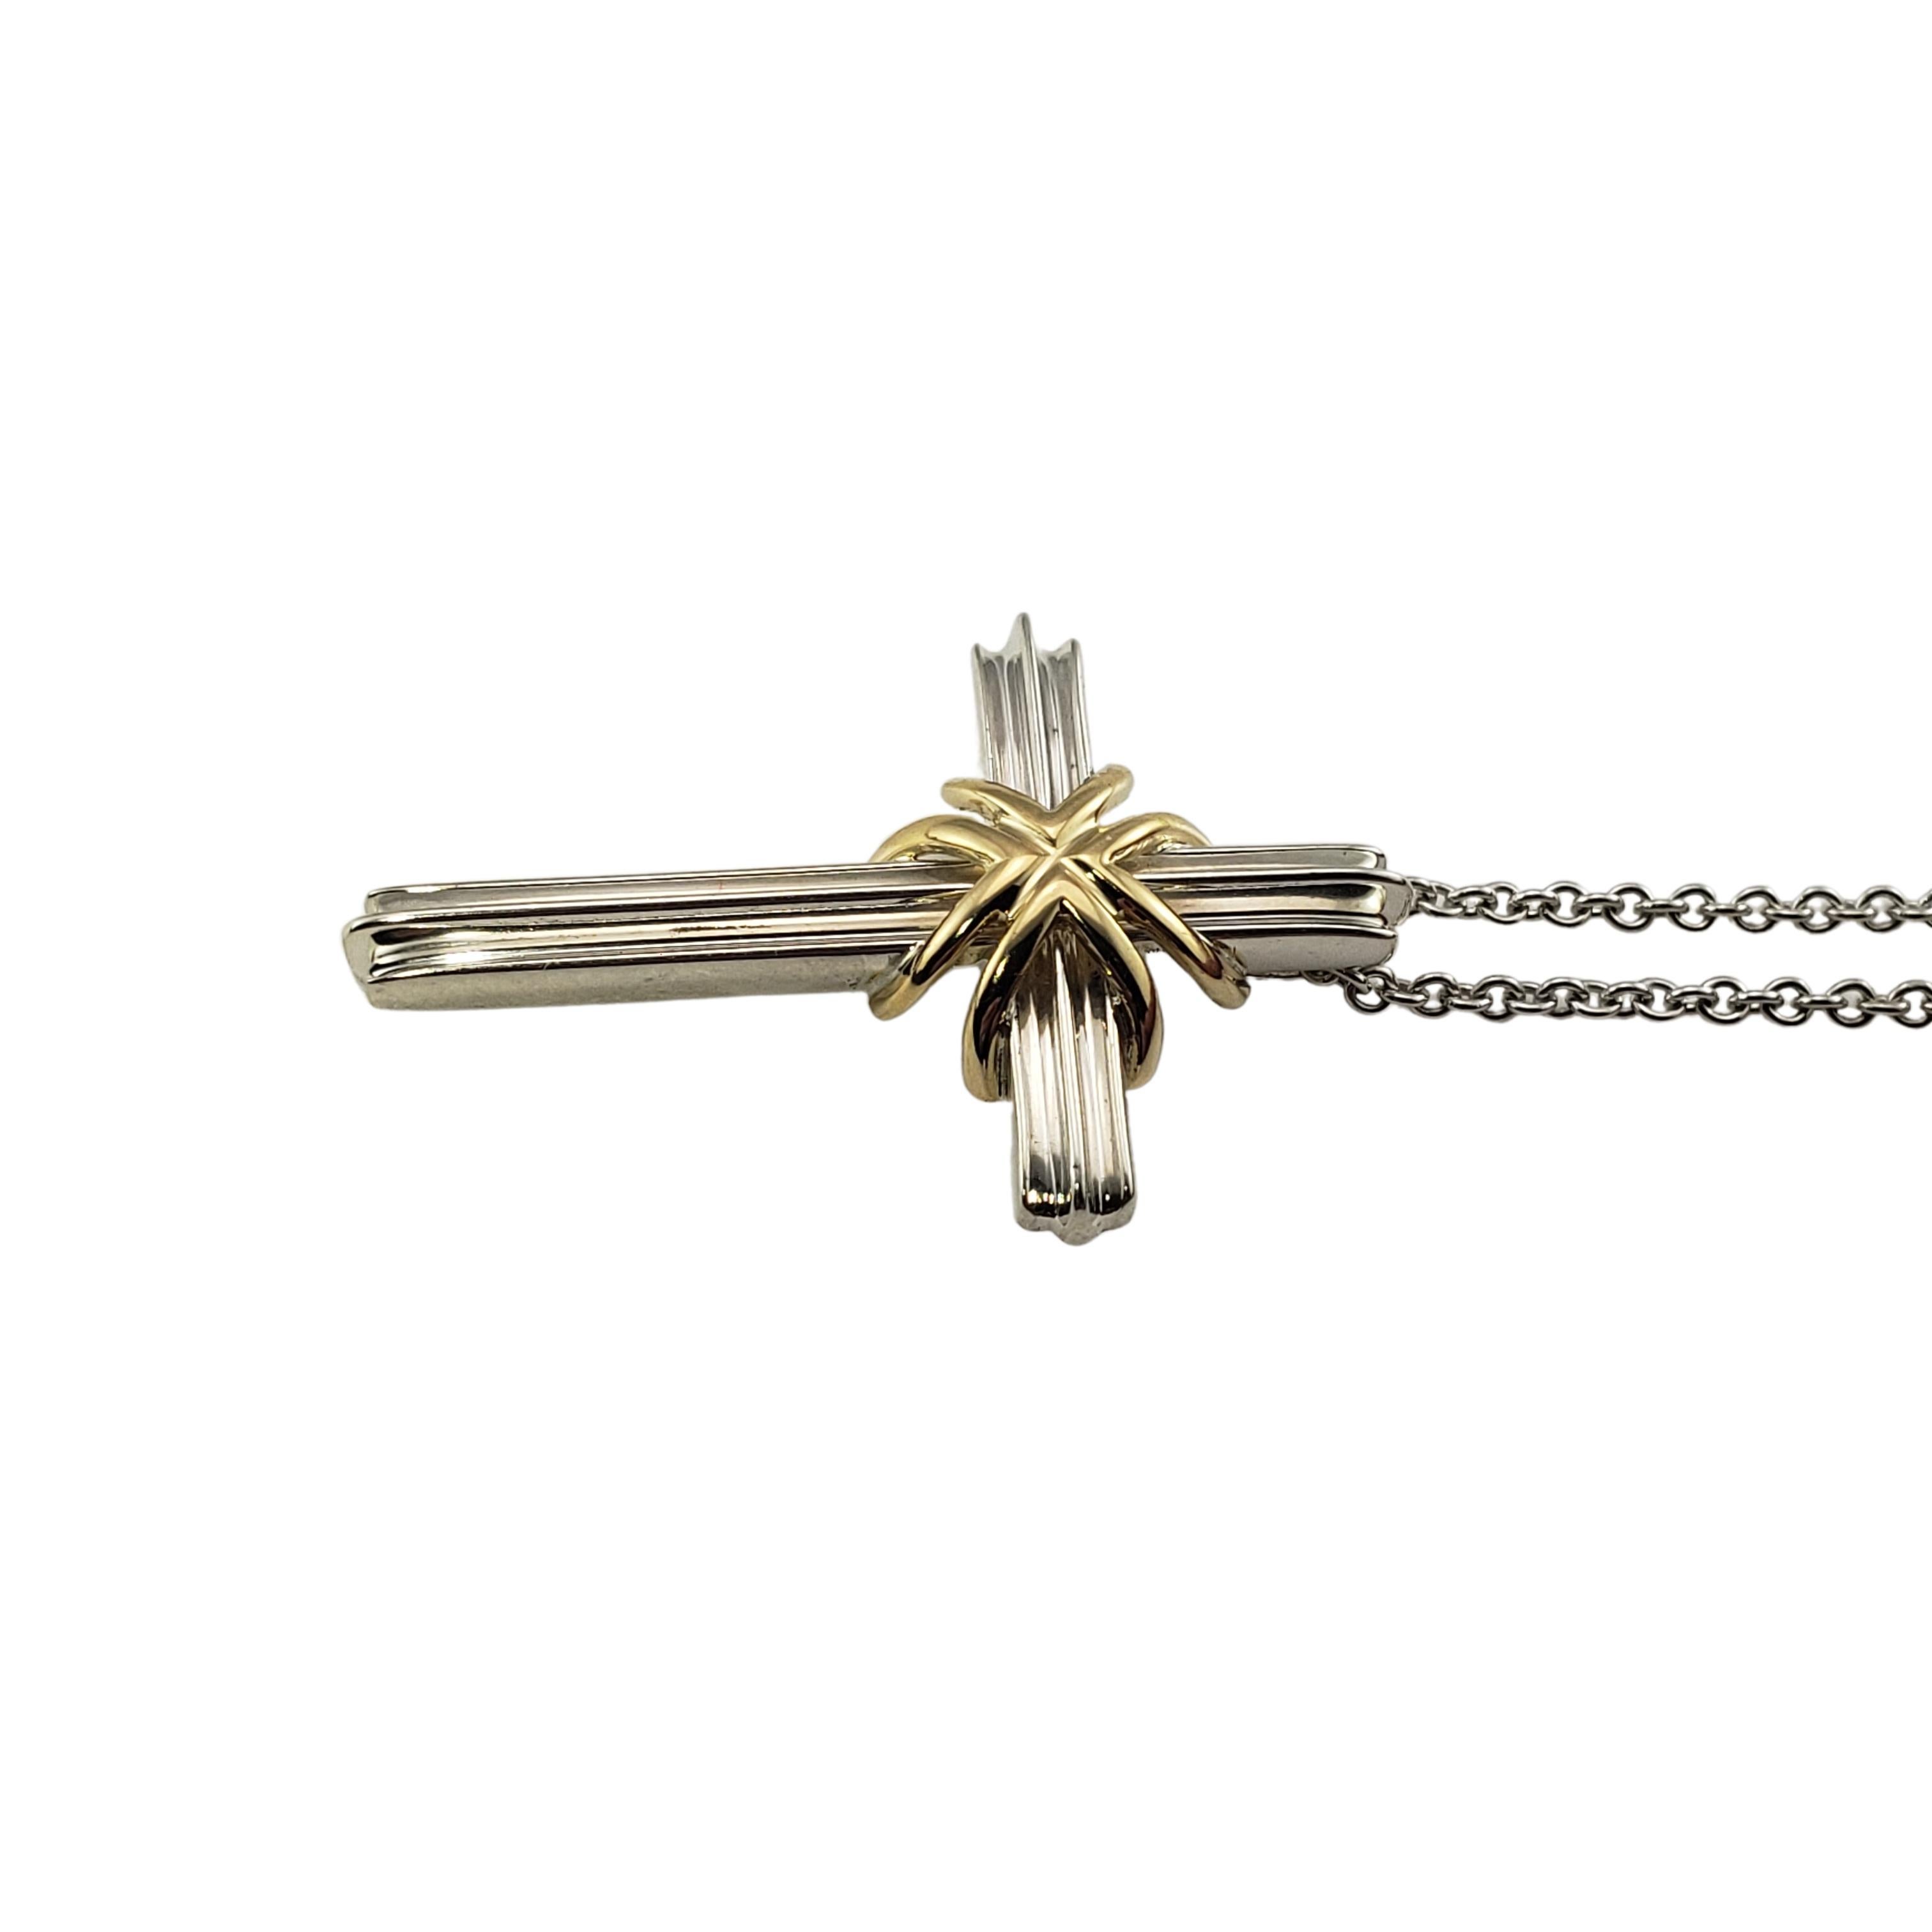 Tiffany & Co. Sterling Silver and 18K yellow Gold Cross Pendant Necklace-

This lovely cross pendant is crafted in beautifully detailed sterling silver and accented with 18K yellow gold.  Suspends from a classic cable chain.

Size:  17.5 inches